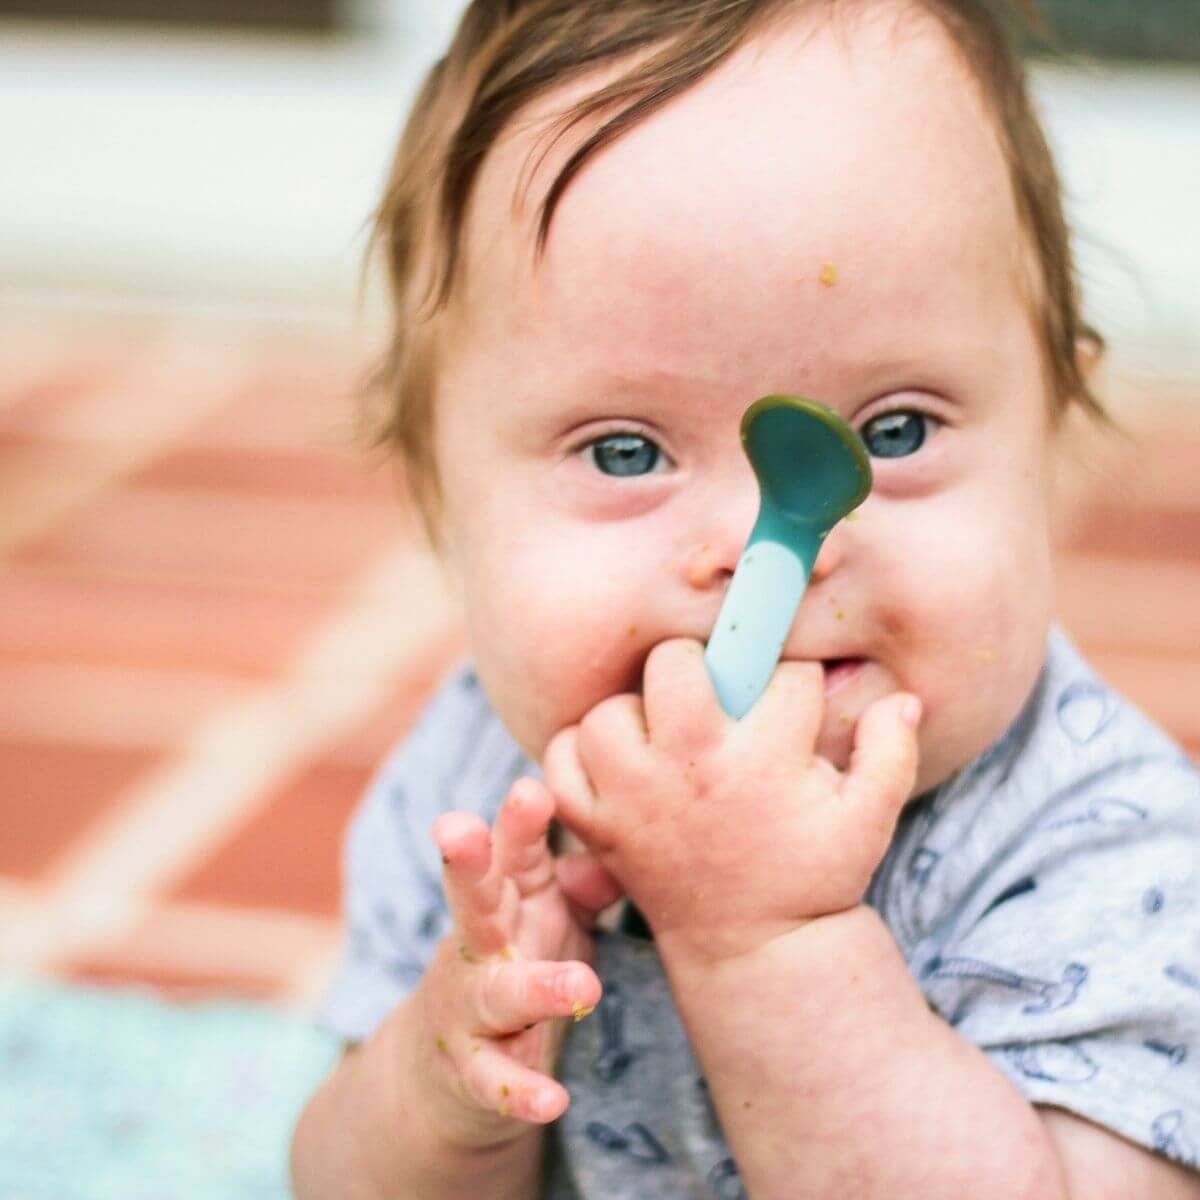 How to Make Baby Food The Homemade Way: Your Go-to Guide